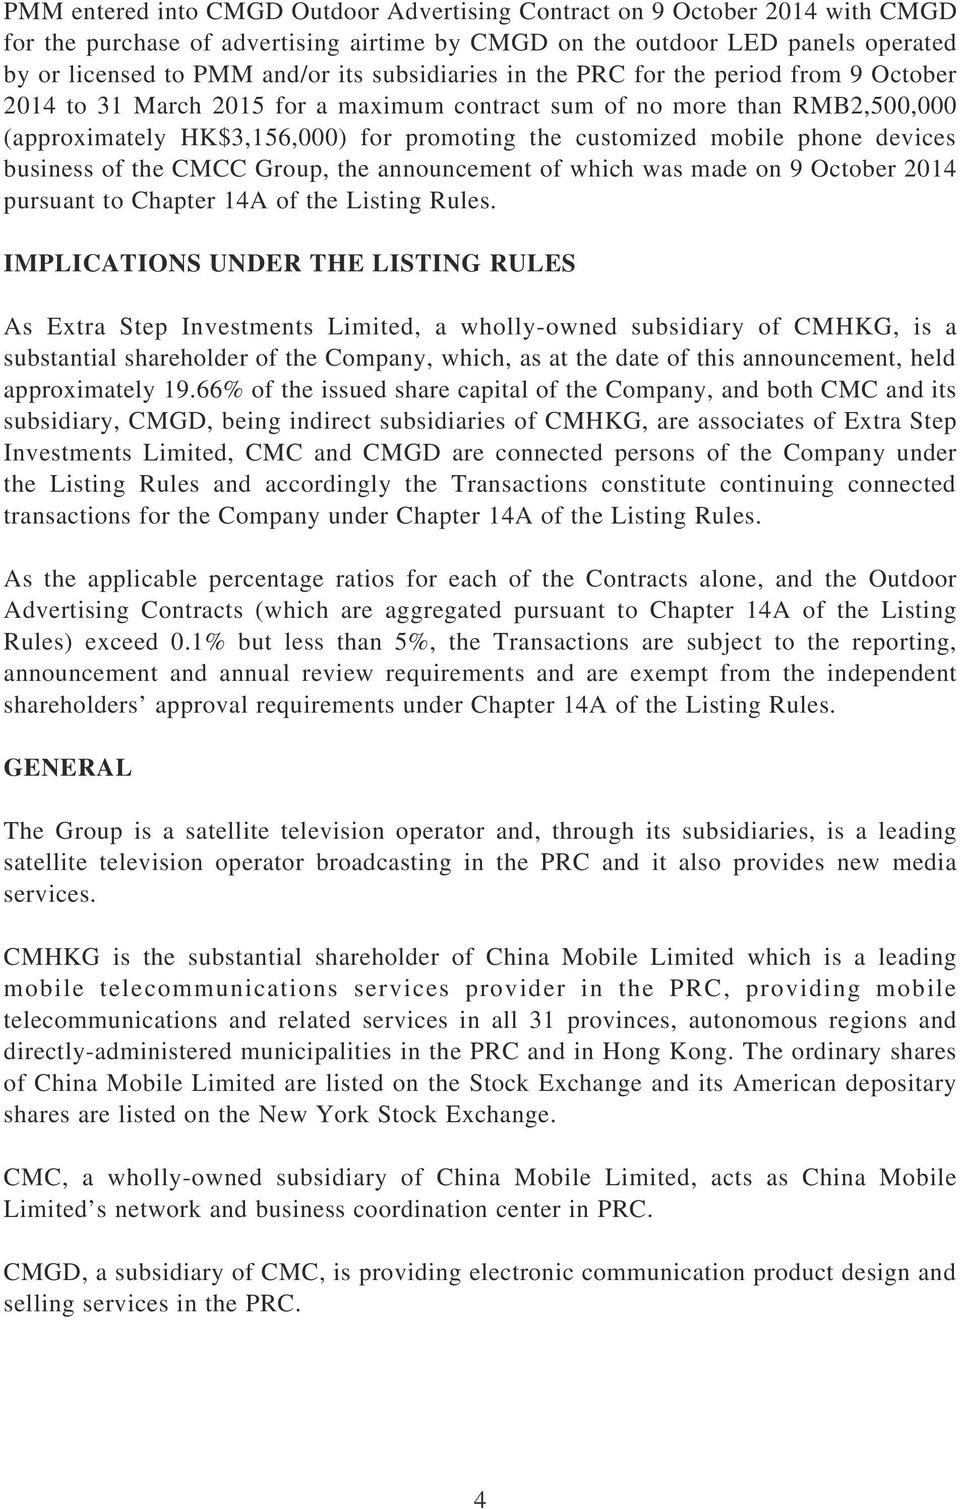 phone devices business of the CMCC Group, the announcement of which was made on 9 October 2014 pursuant to Chapter 14A of the Listing Rules.